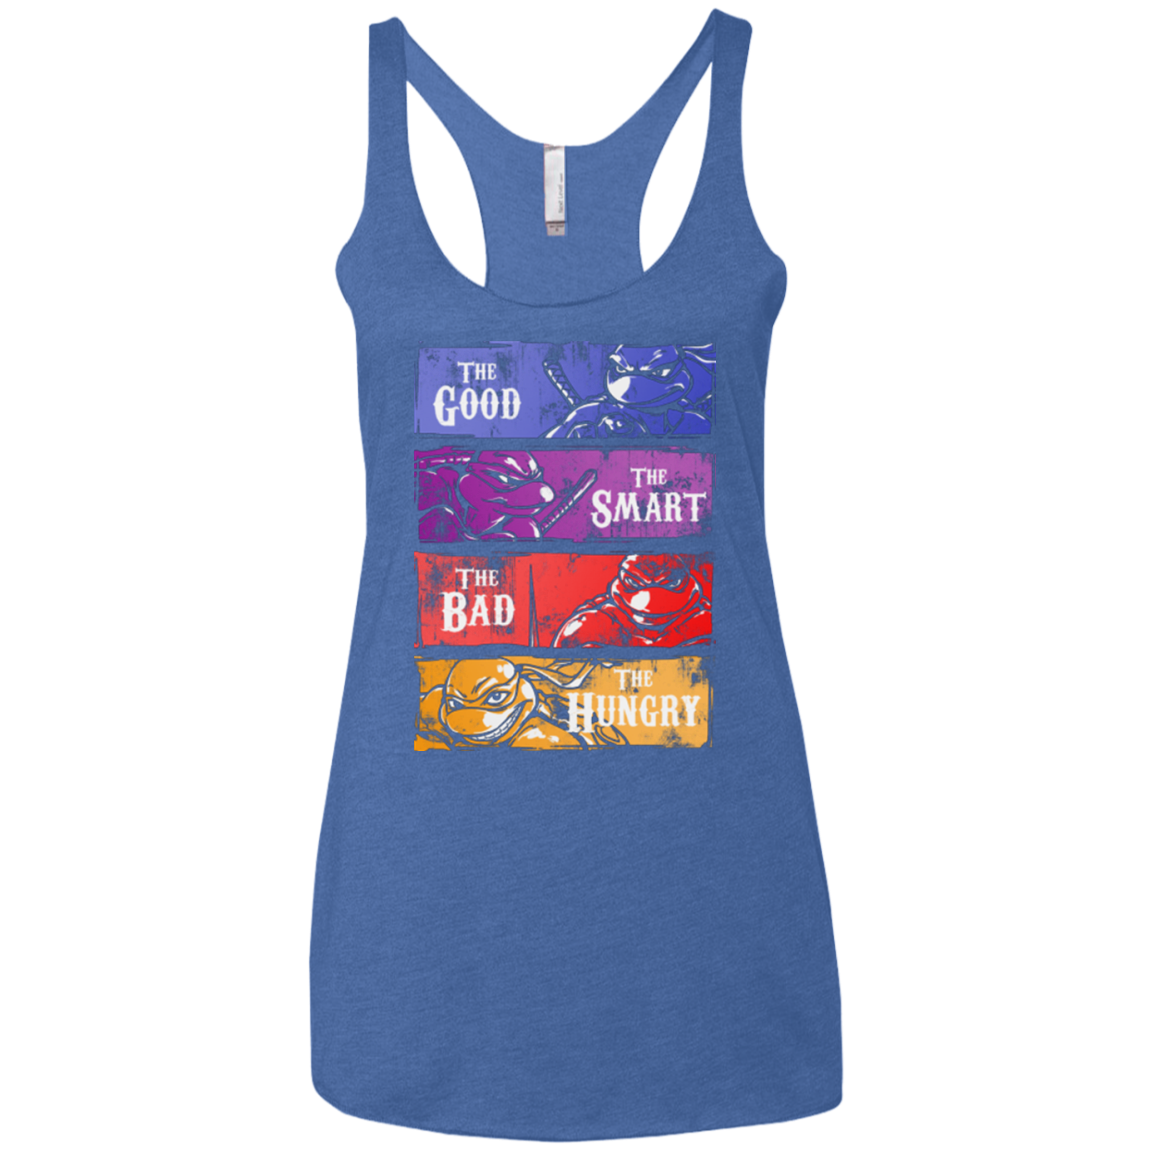 The Good, Bad, Smart and Hungry Women's Triblend Racerback Tank